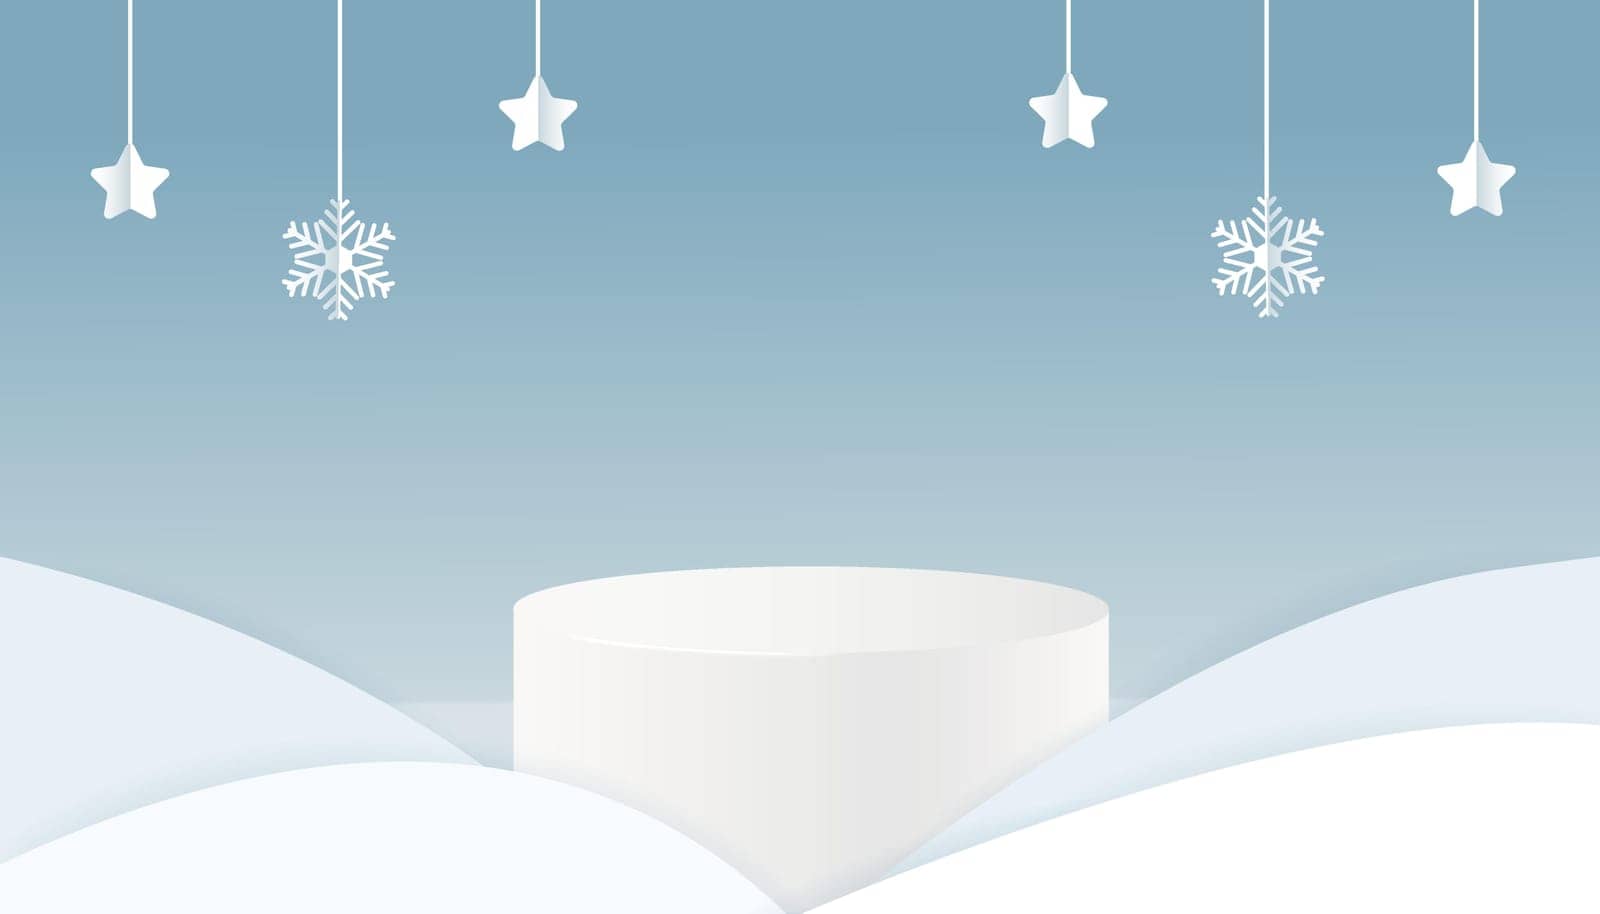 Christmas Winter landscape with snow drifts and product podium scene. Paper cut snow background. Vector